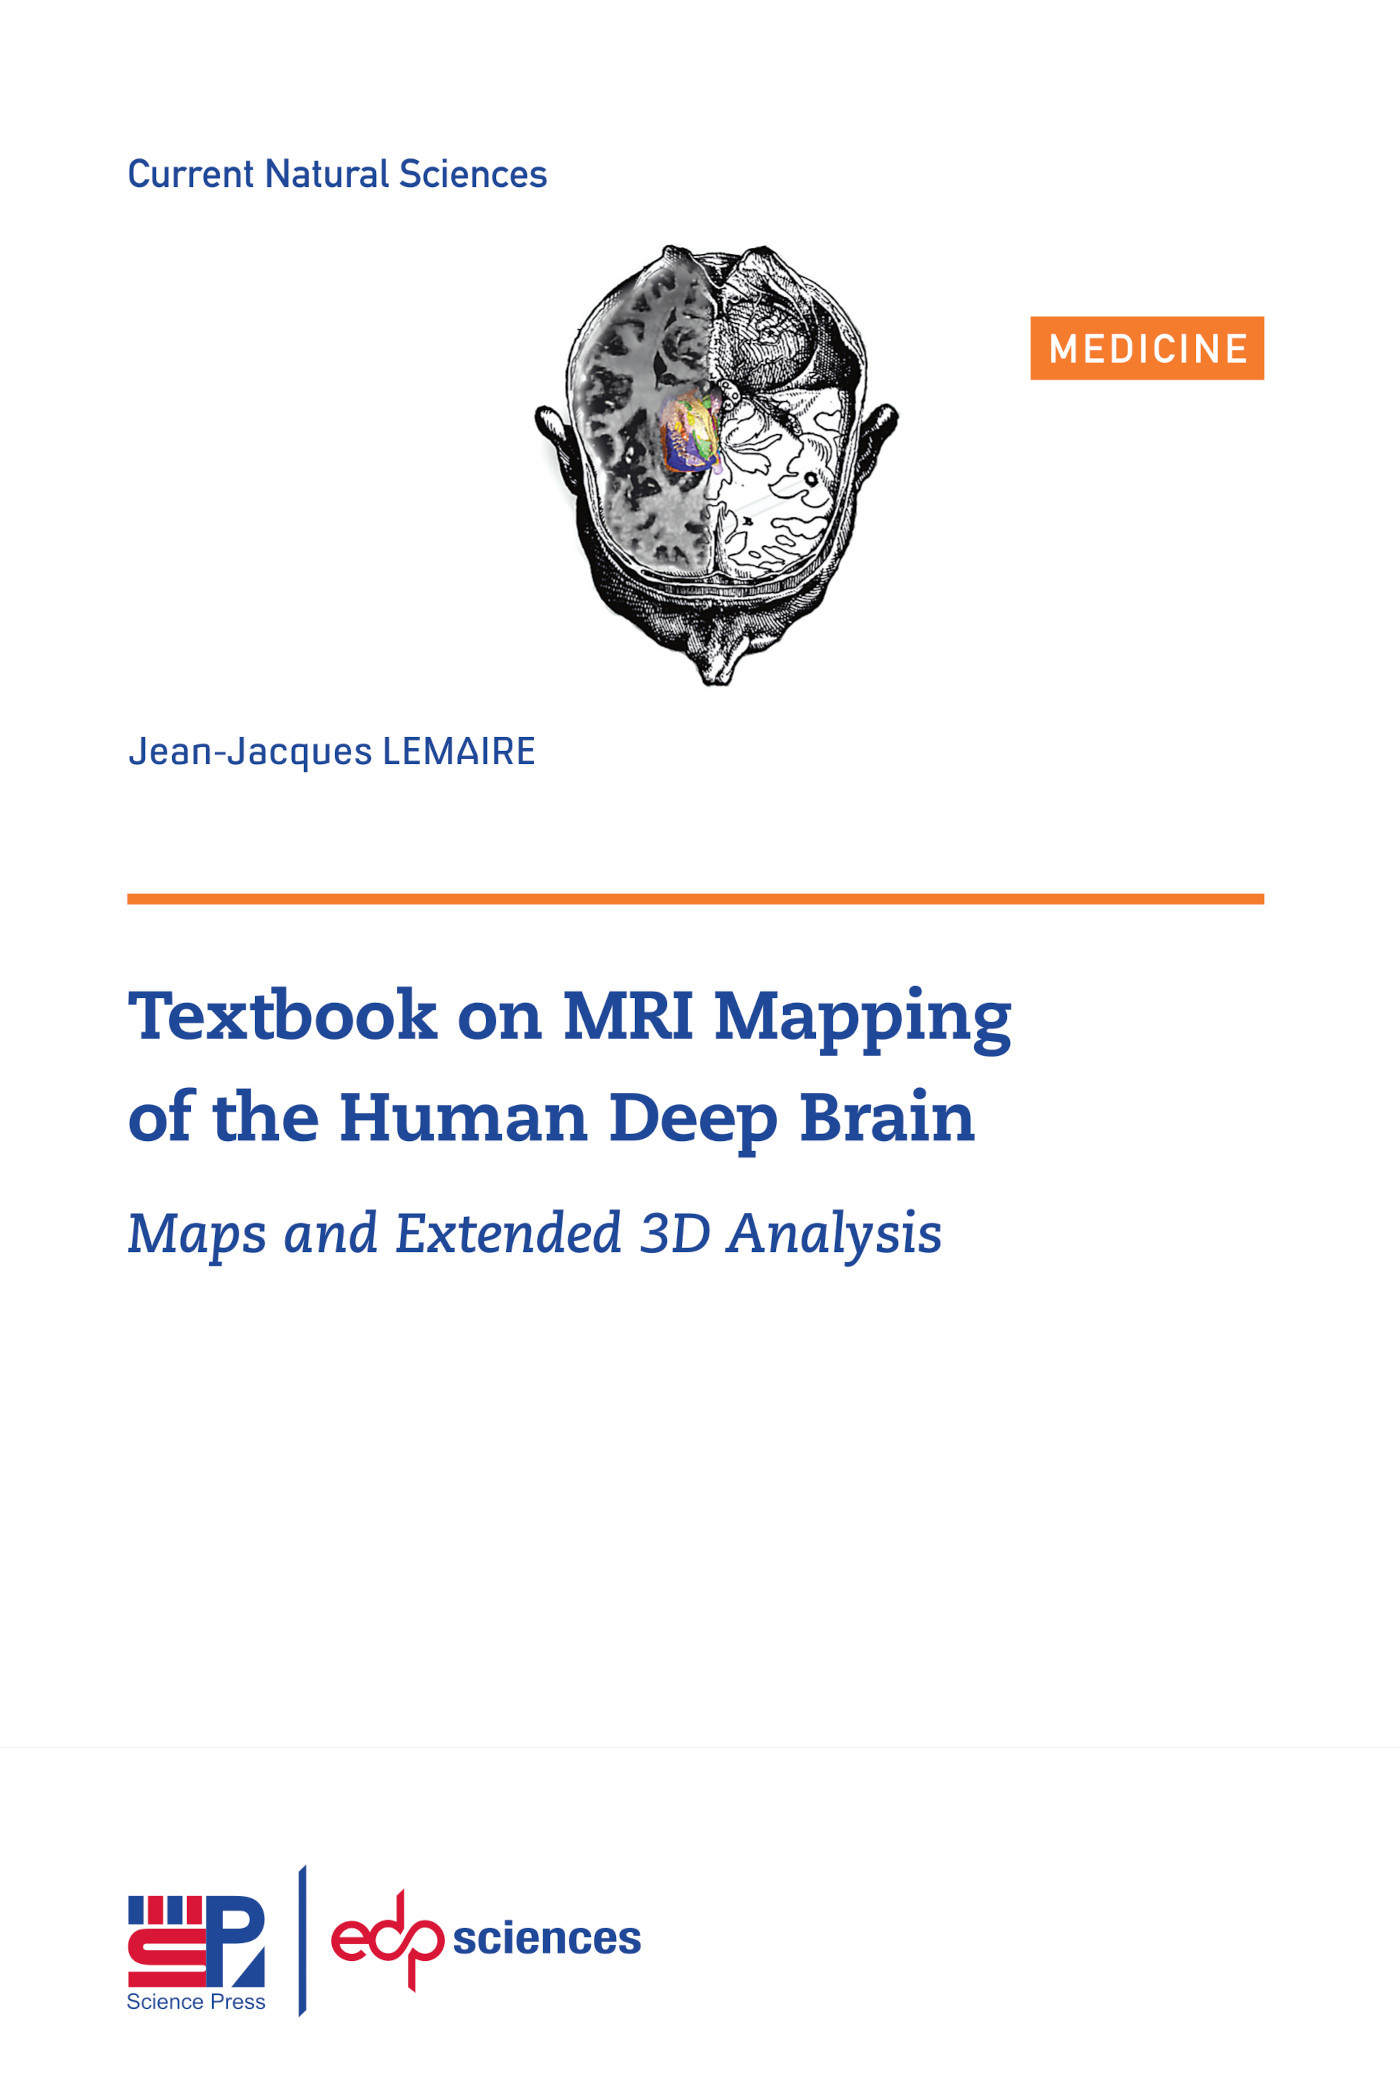 Textbook on MRI Mapping of the Human Deep Brain, Maps and Extended 3D Analysis (9782759825752-front-cover)